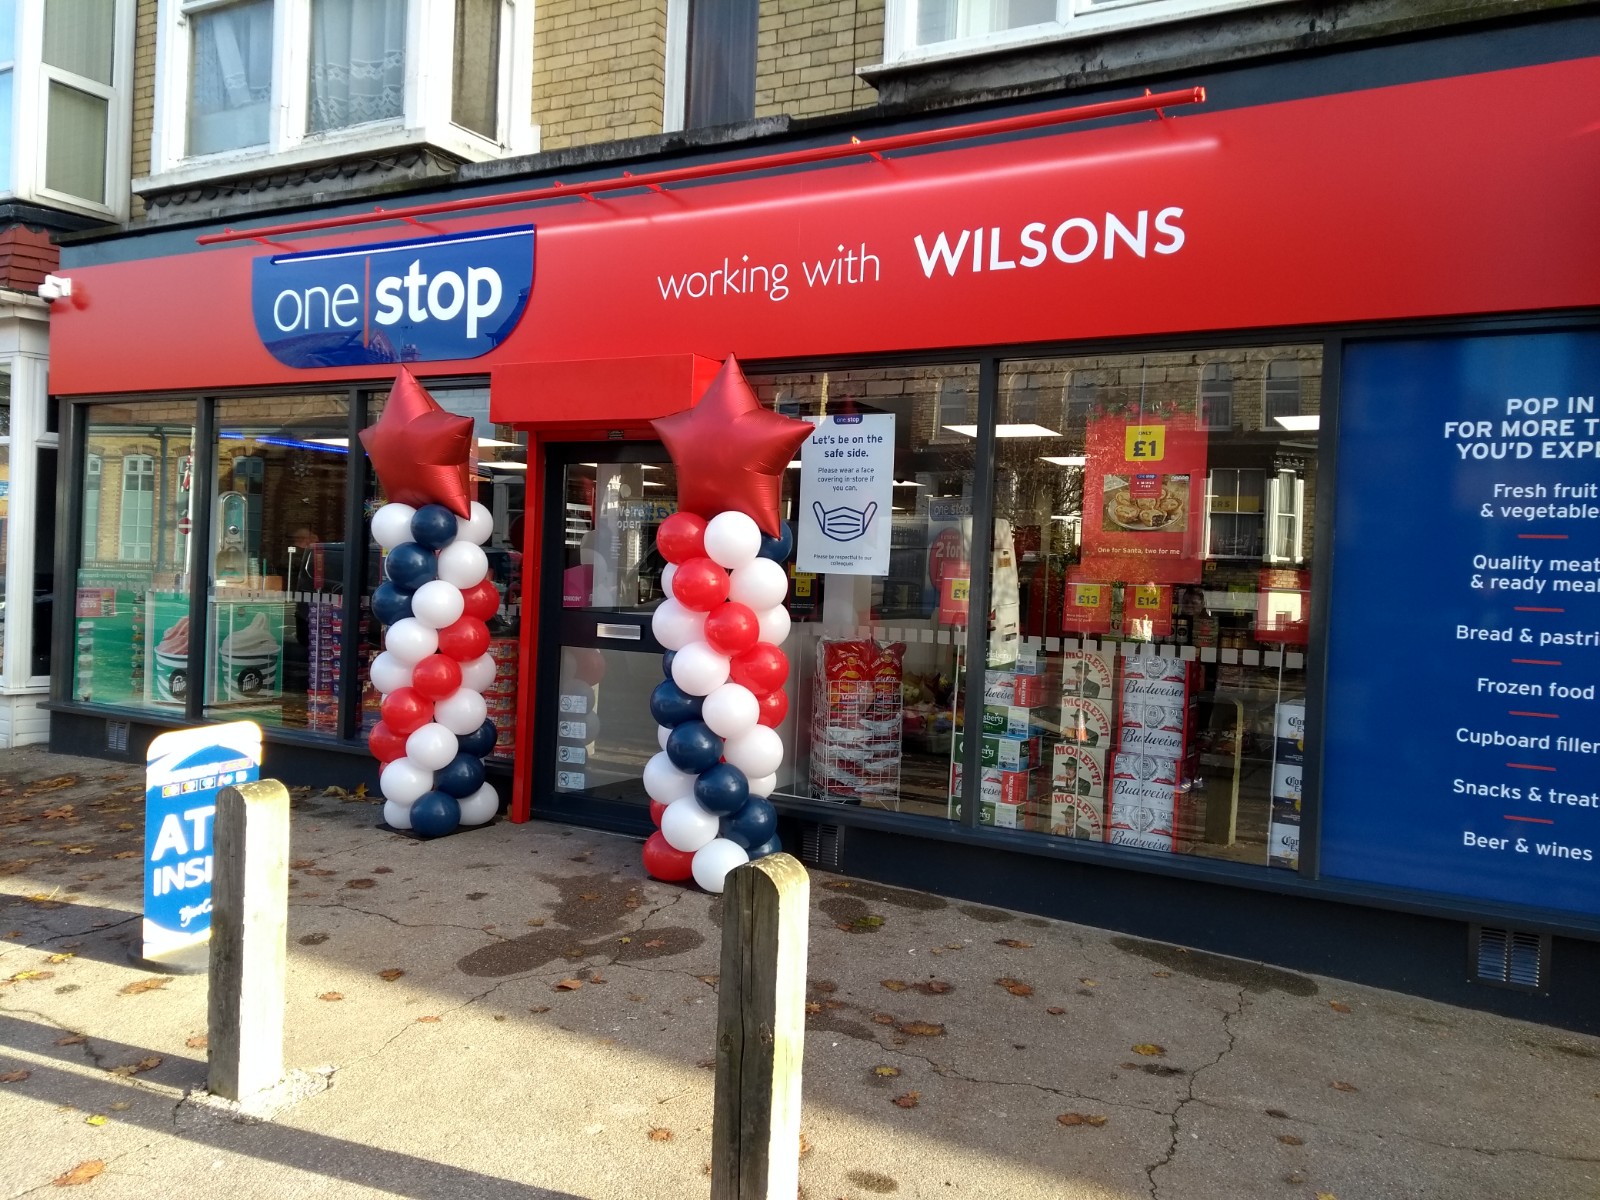 Celebrations as franchisee opens his 13th One Stop store